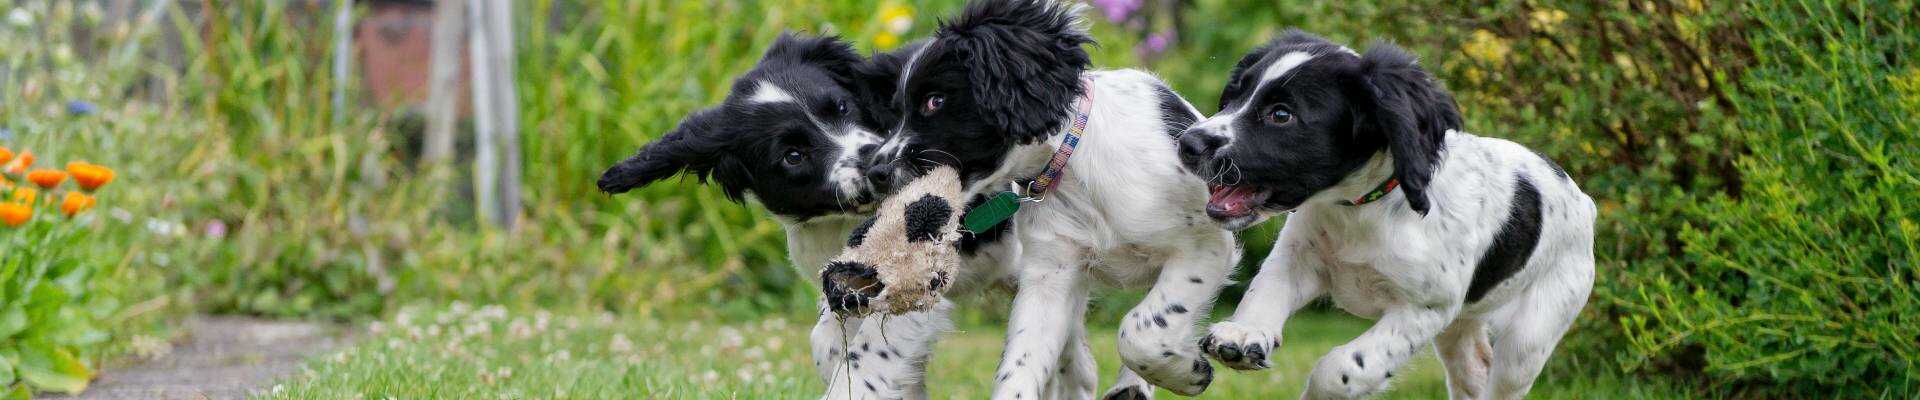 three black and white puppies wrestling with toy